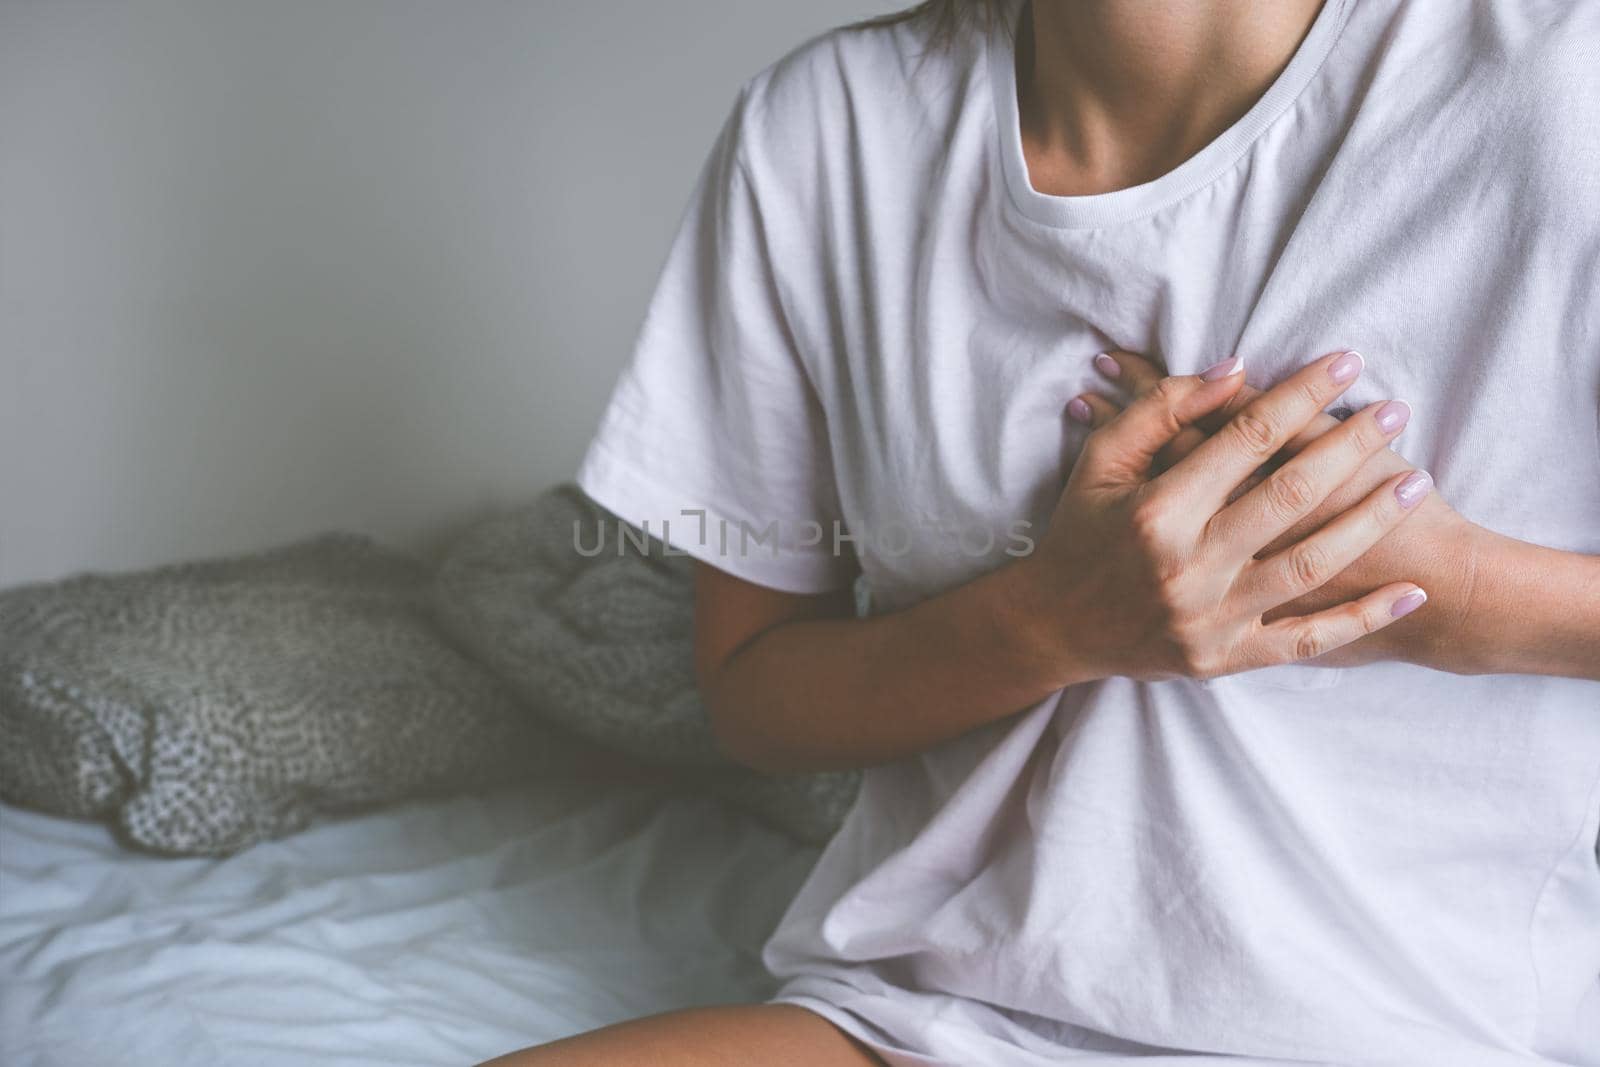 Woman holding chest because of heart disease, heart attack, heart pain or chest pain by DariaKulkova